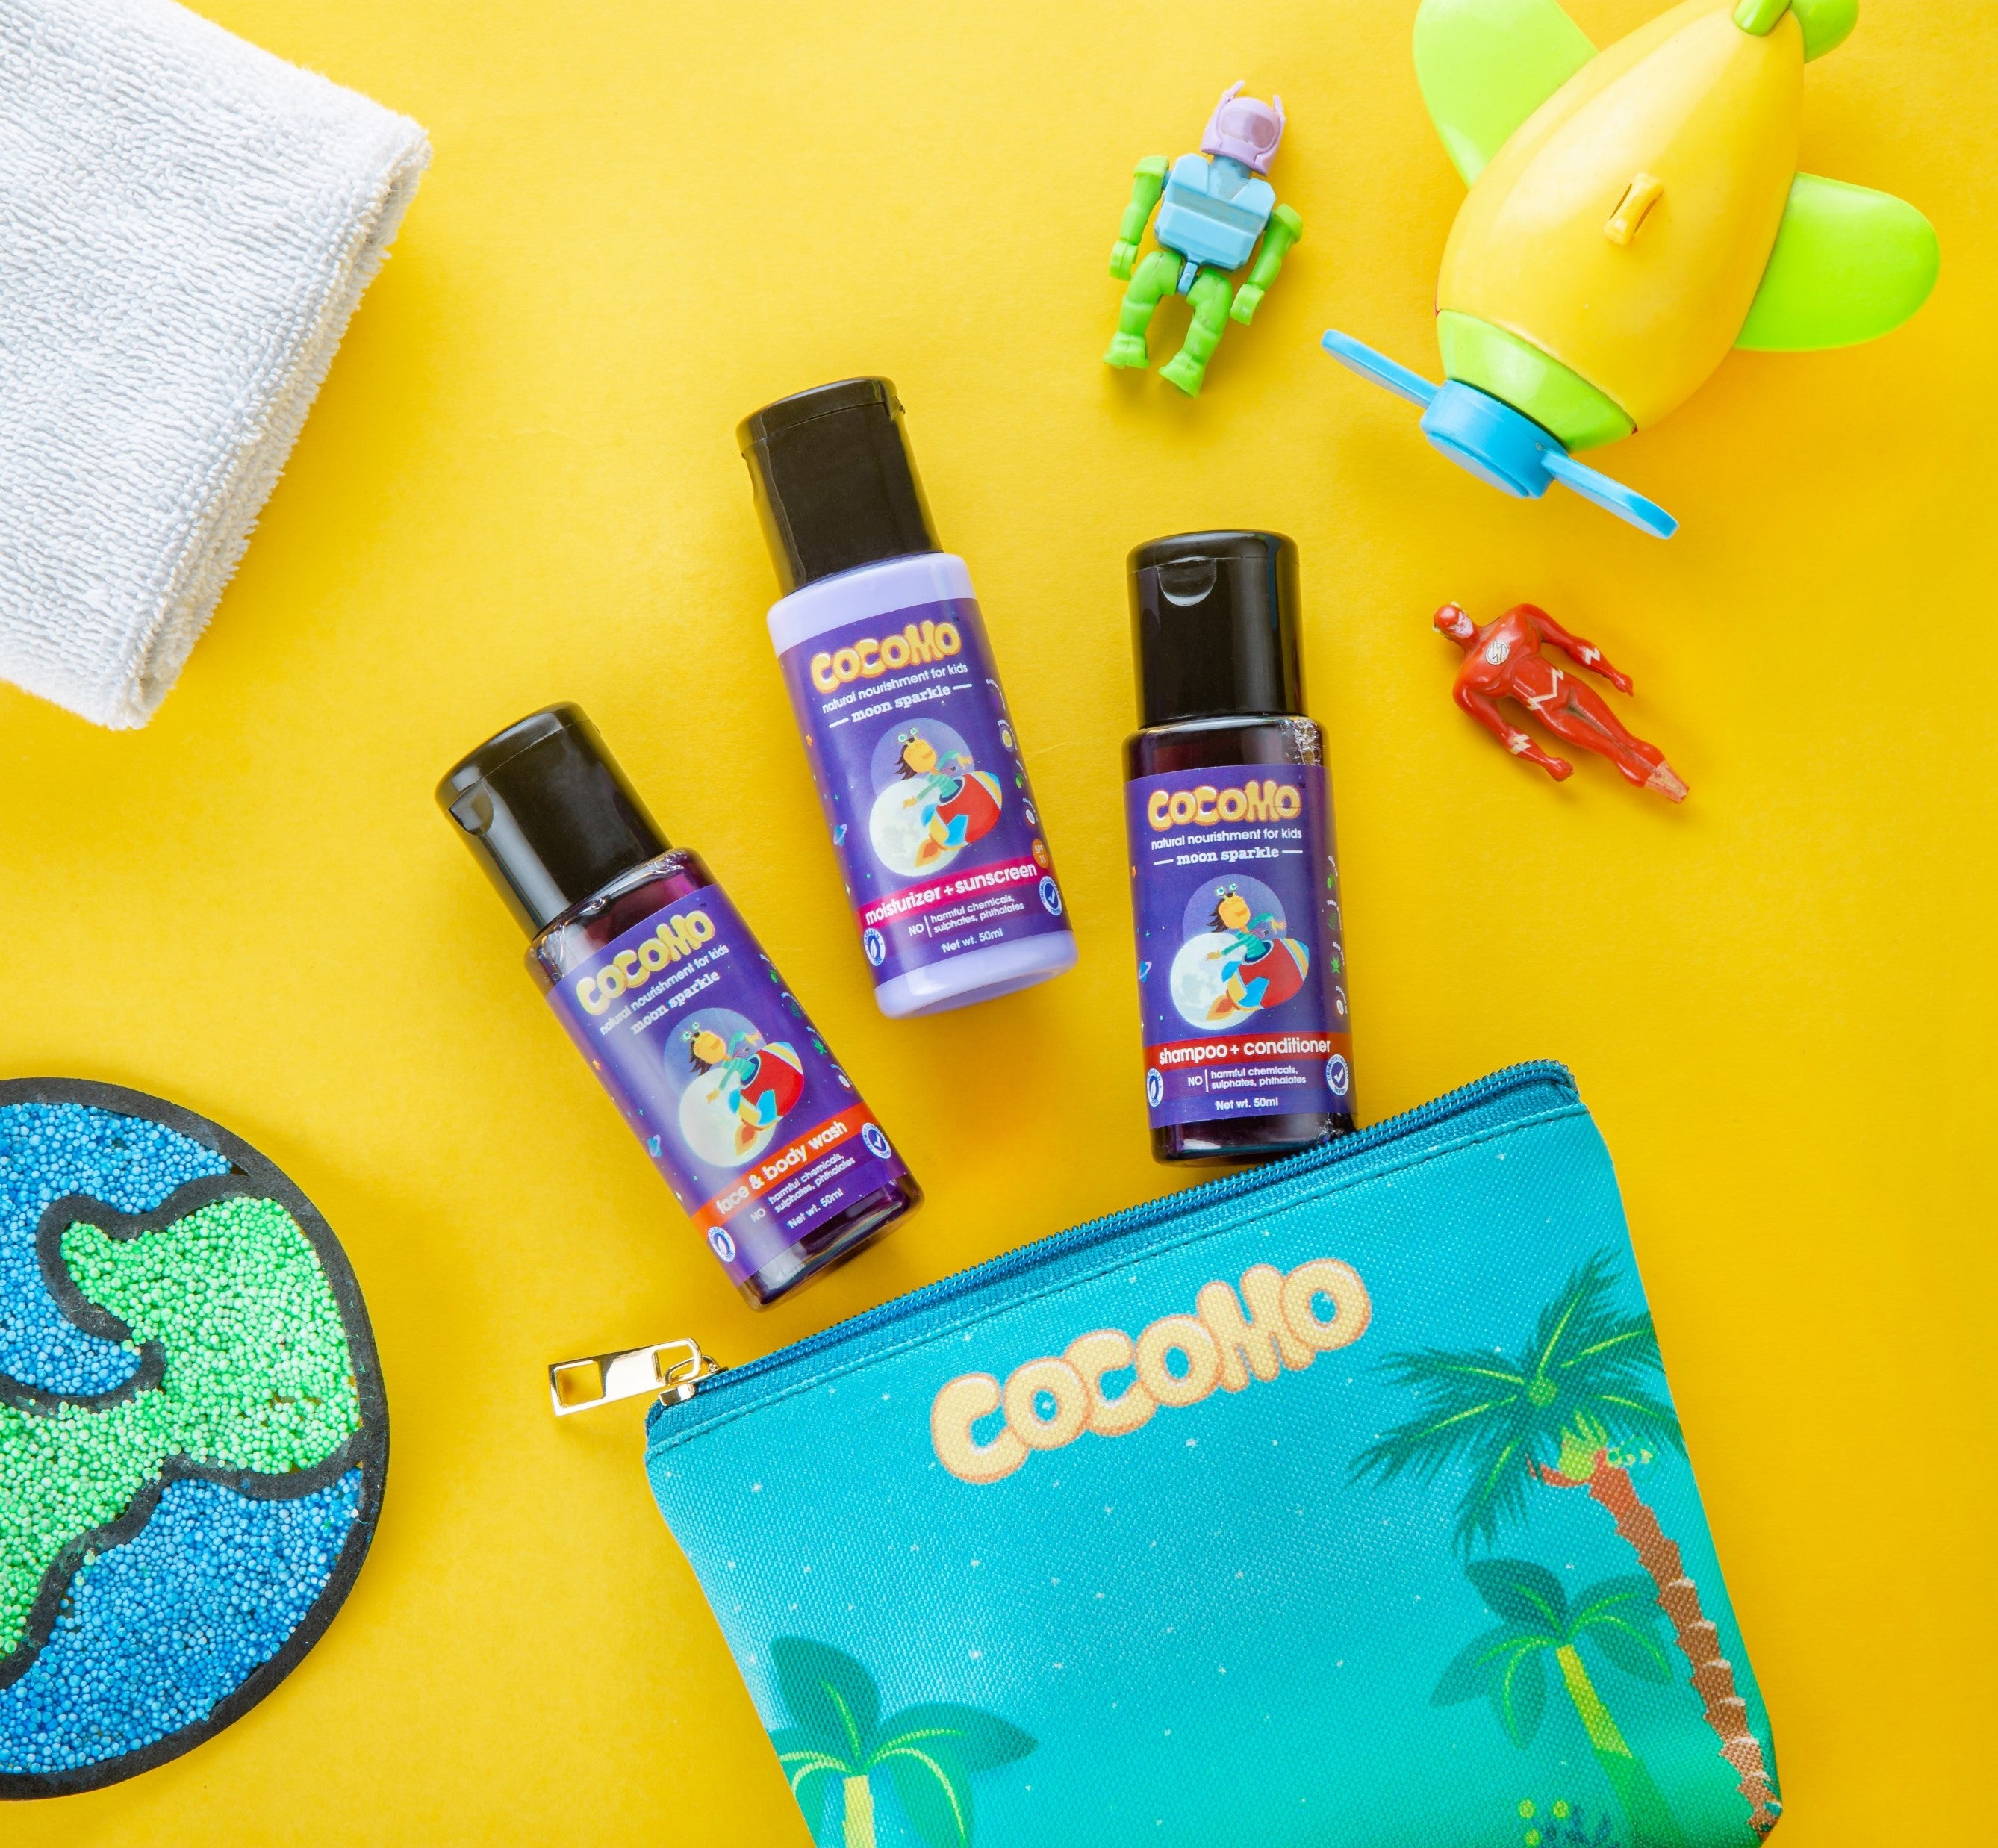 Cocomo Travel & Gift Pack - Moon Sparkle